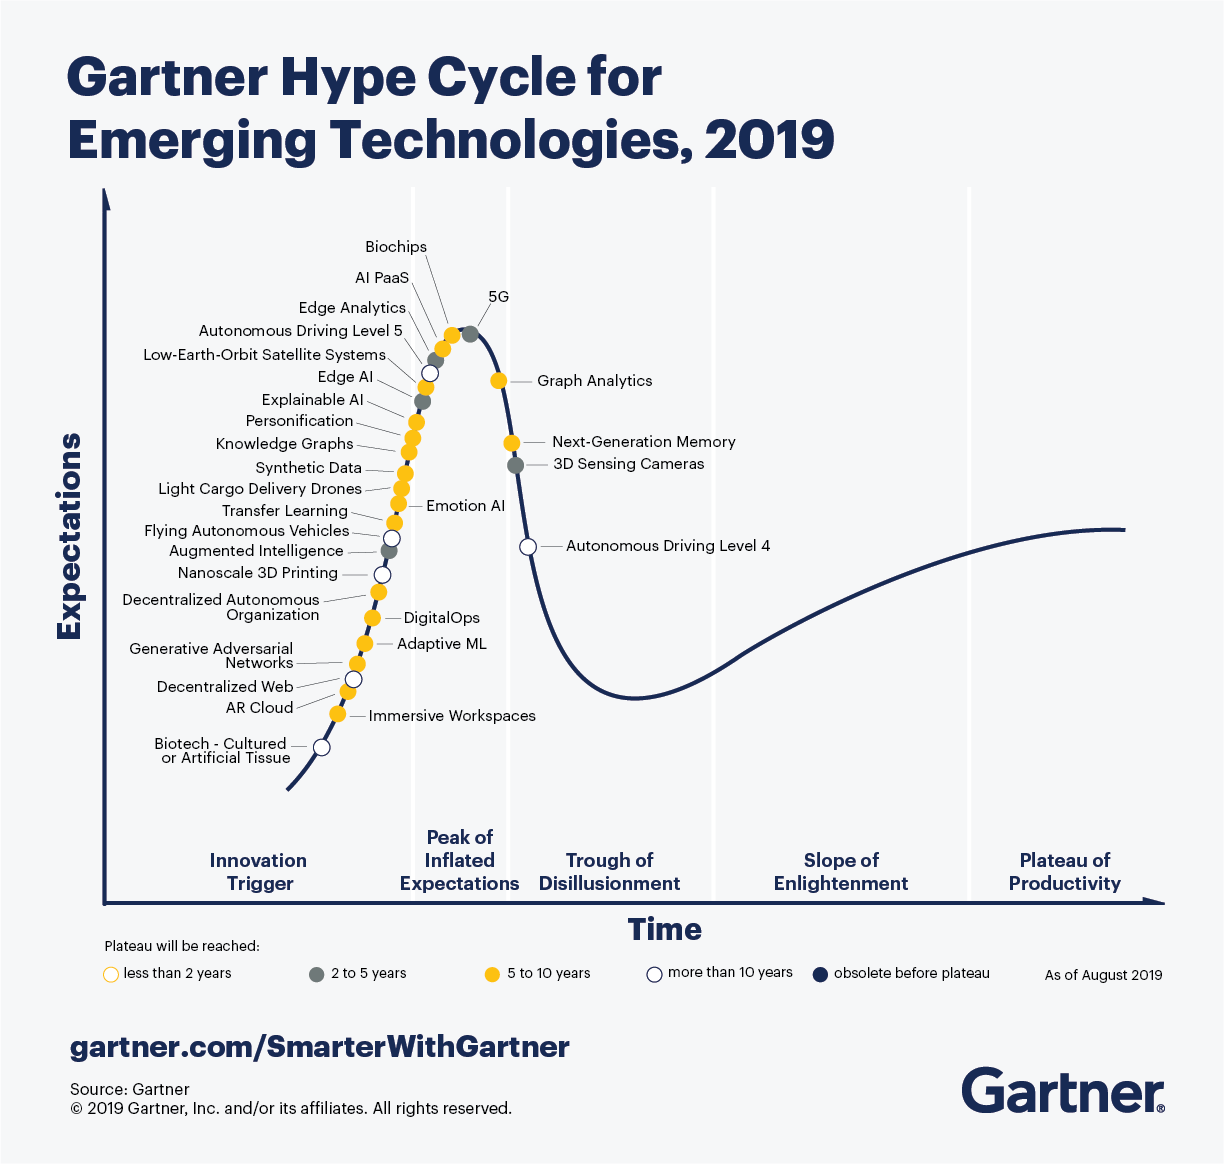 Gartner Hype Cycle expected growth cycle graph for emerging technologies, 2019